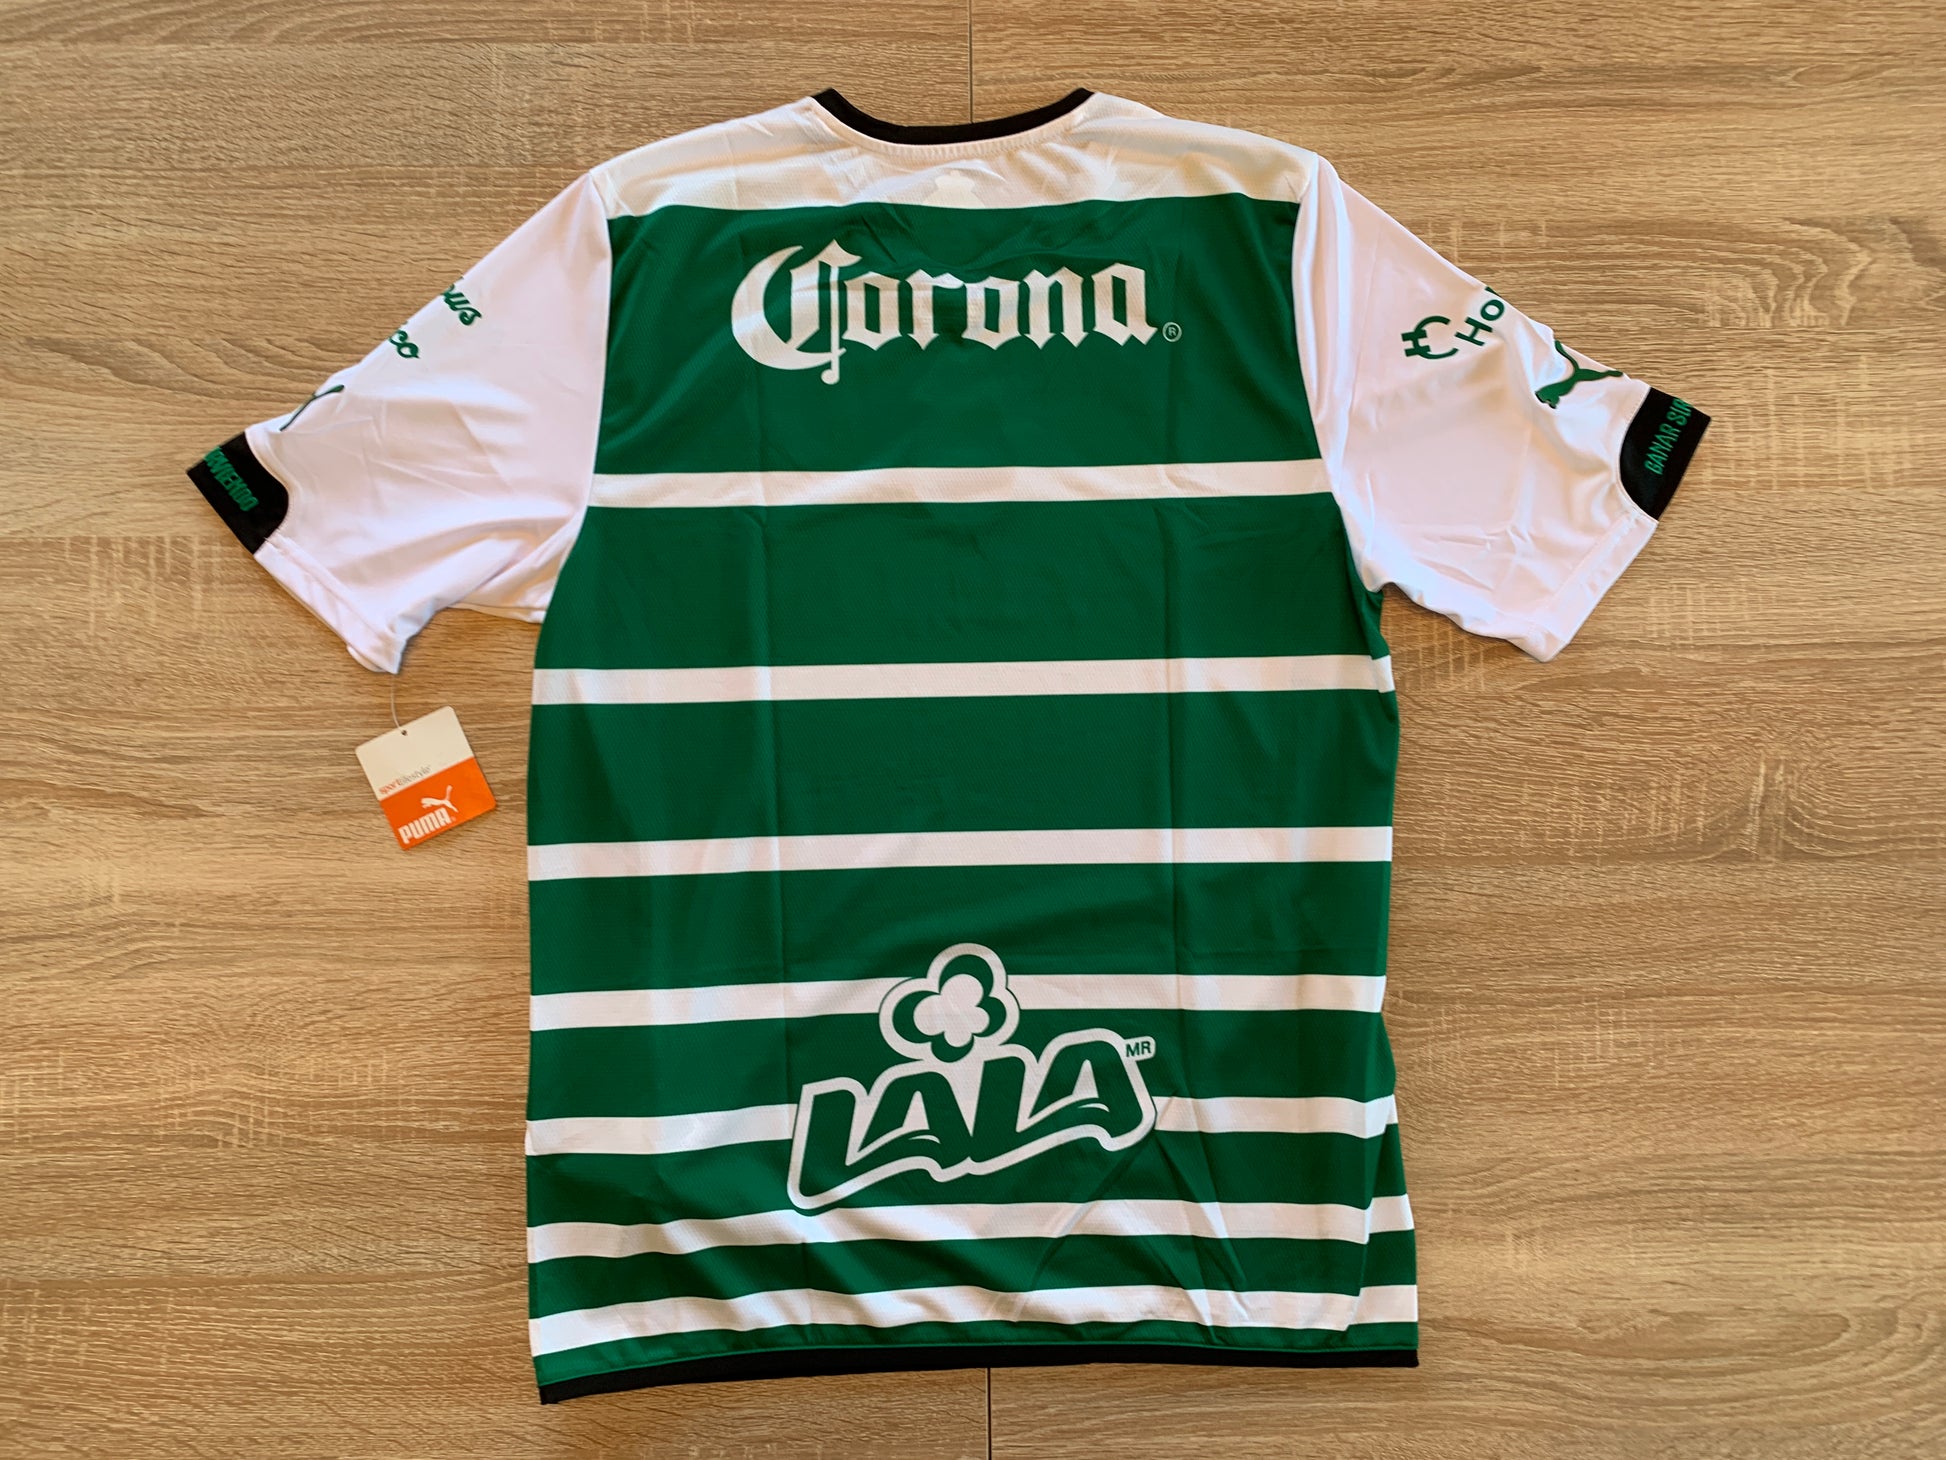 Club Santos Laguna Home Shirt from 2014-2015: Experience the sleek and stylish Slim Fit version of this iconic green and white striped jersey. Show your unwavering support for Los Guerreros and be a part of Santos Laguna's football journey. Order now to represent your club with flair